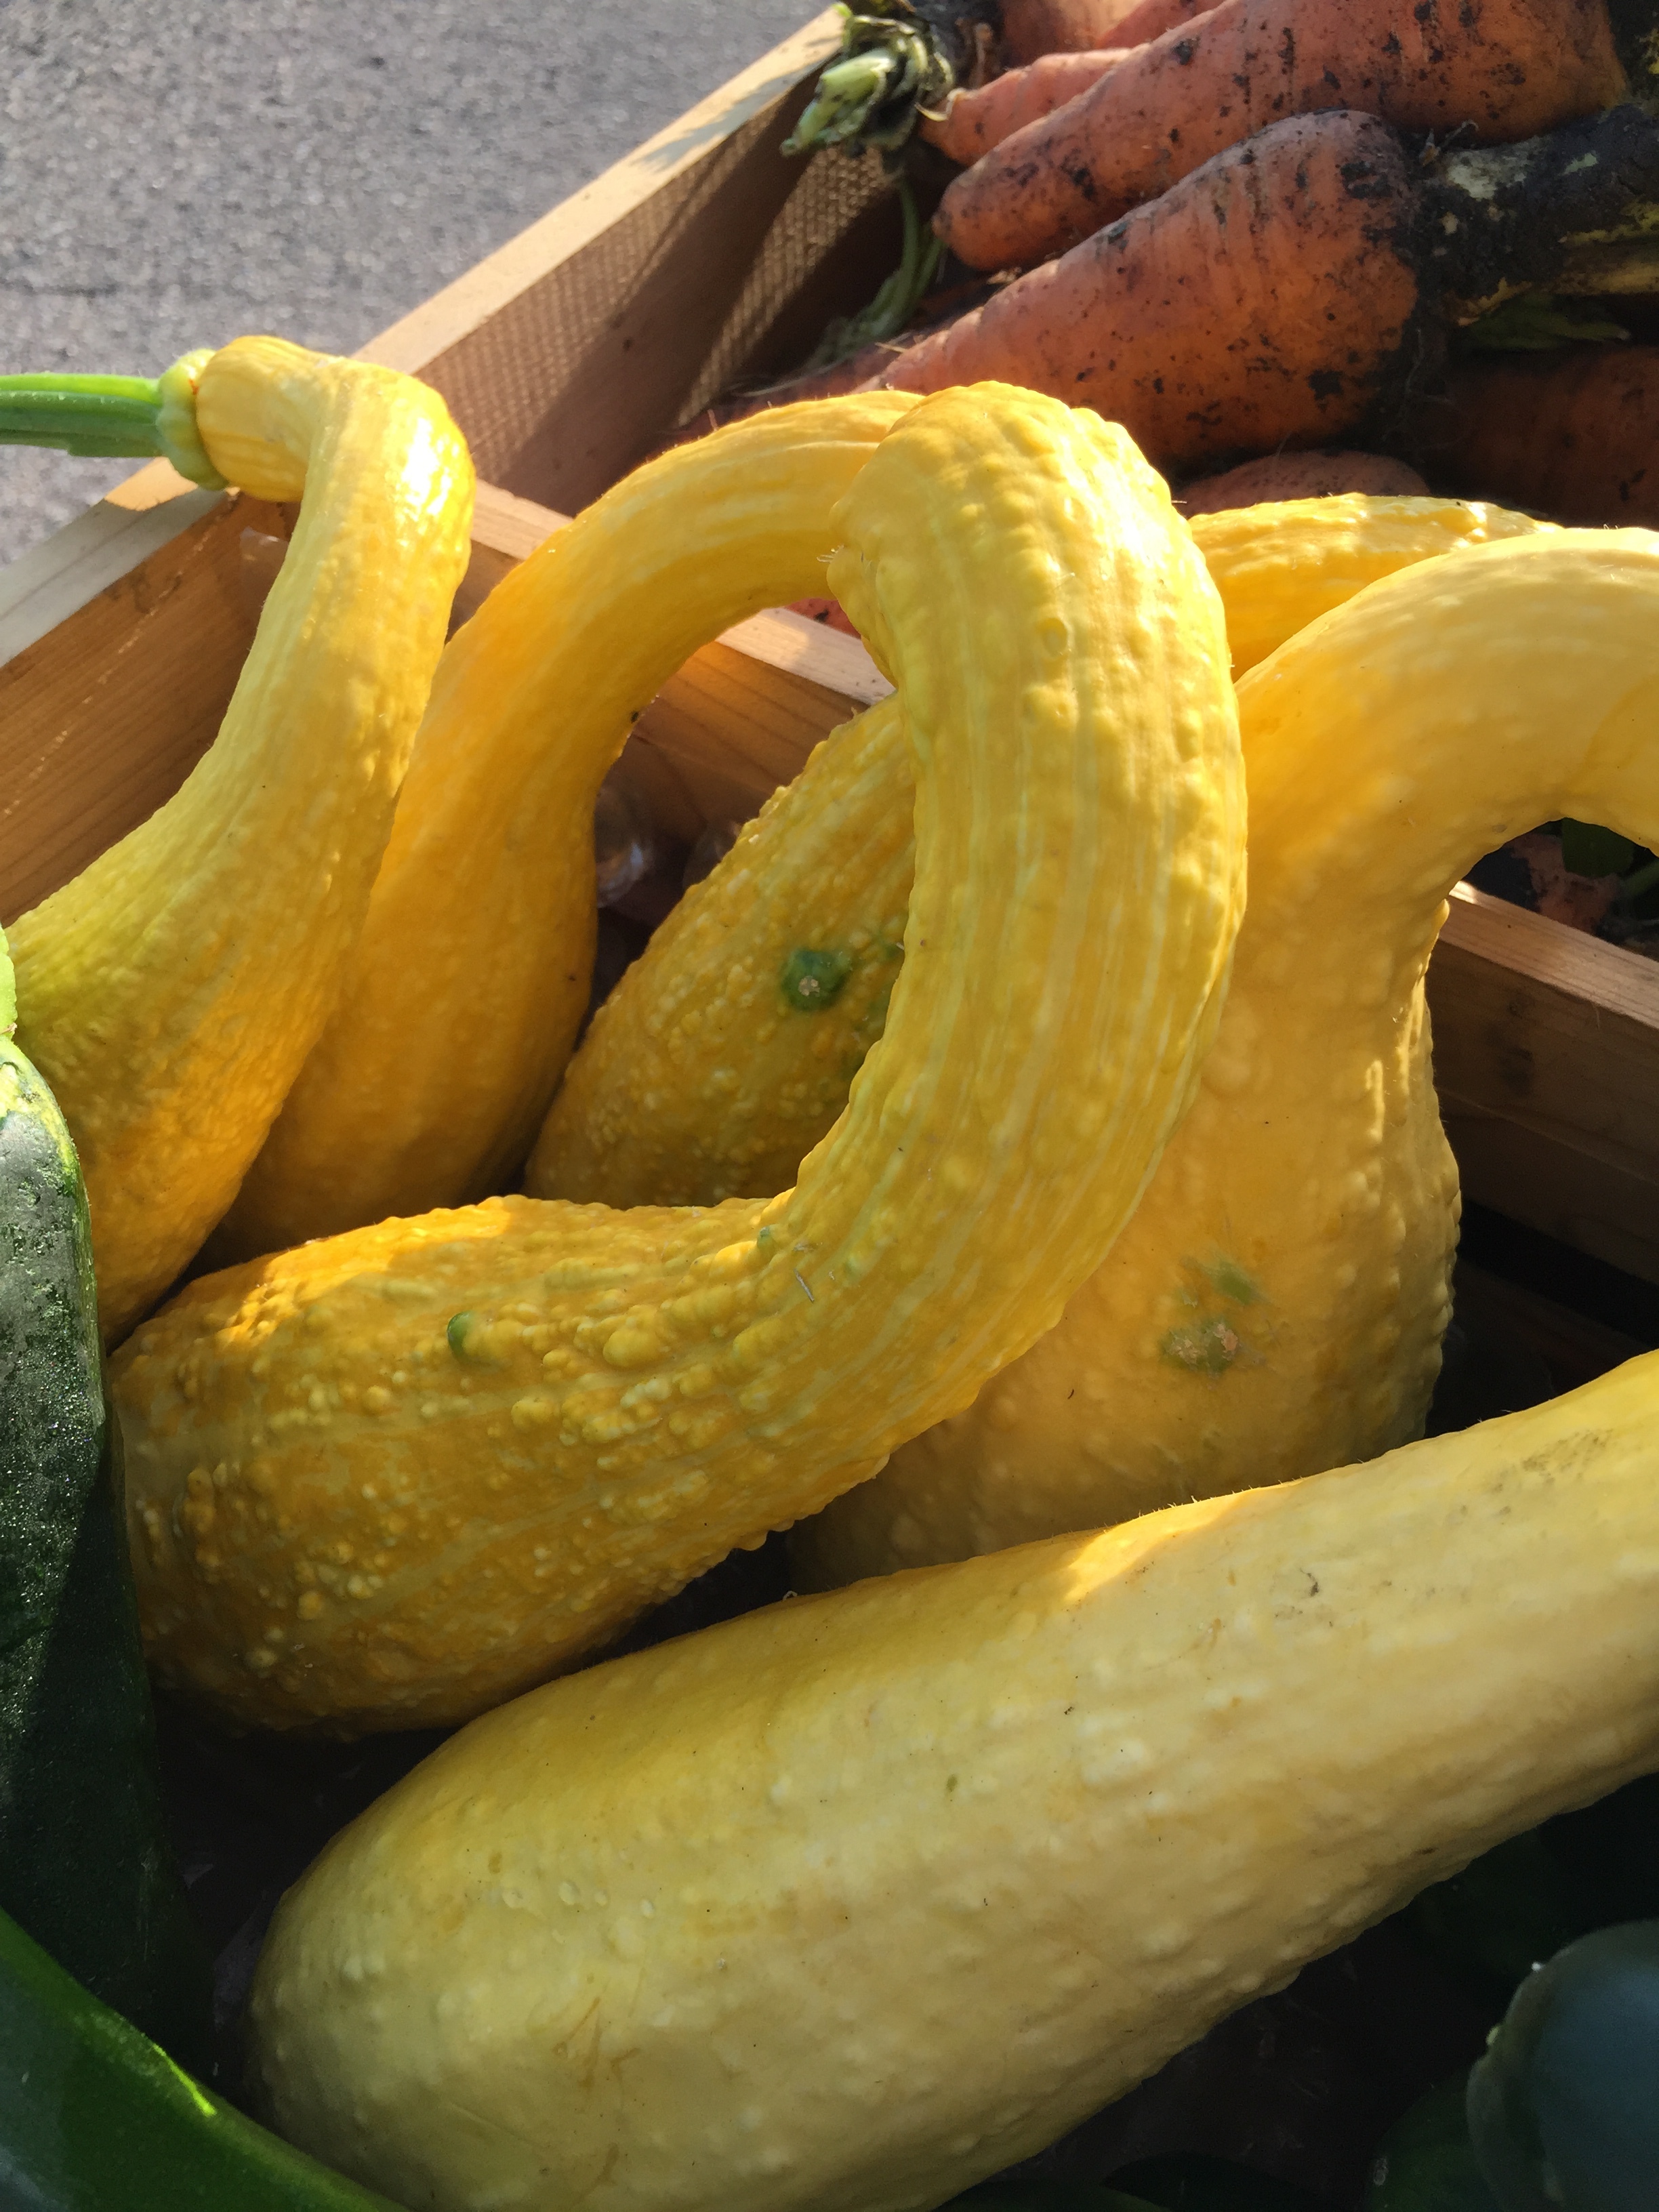  Some yellow crook-neck squash ready for sale. 